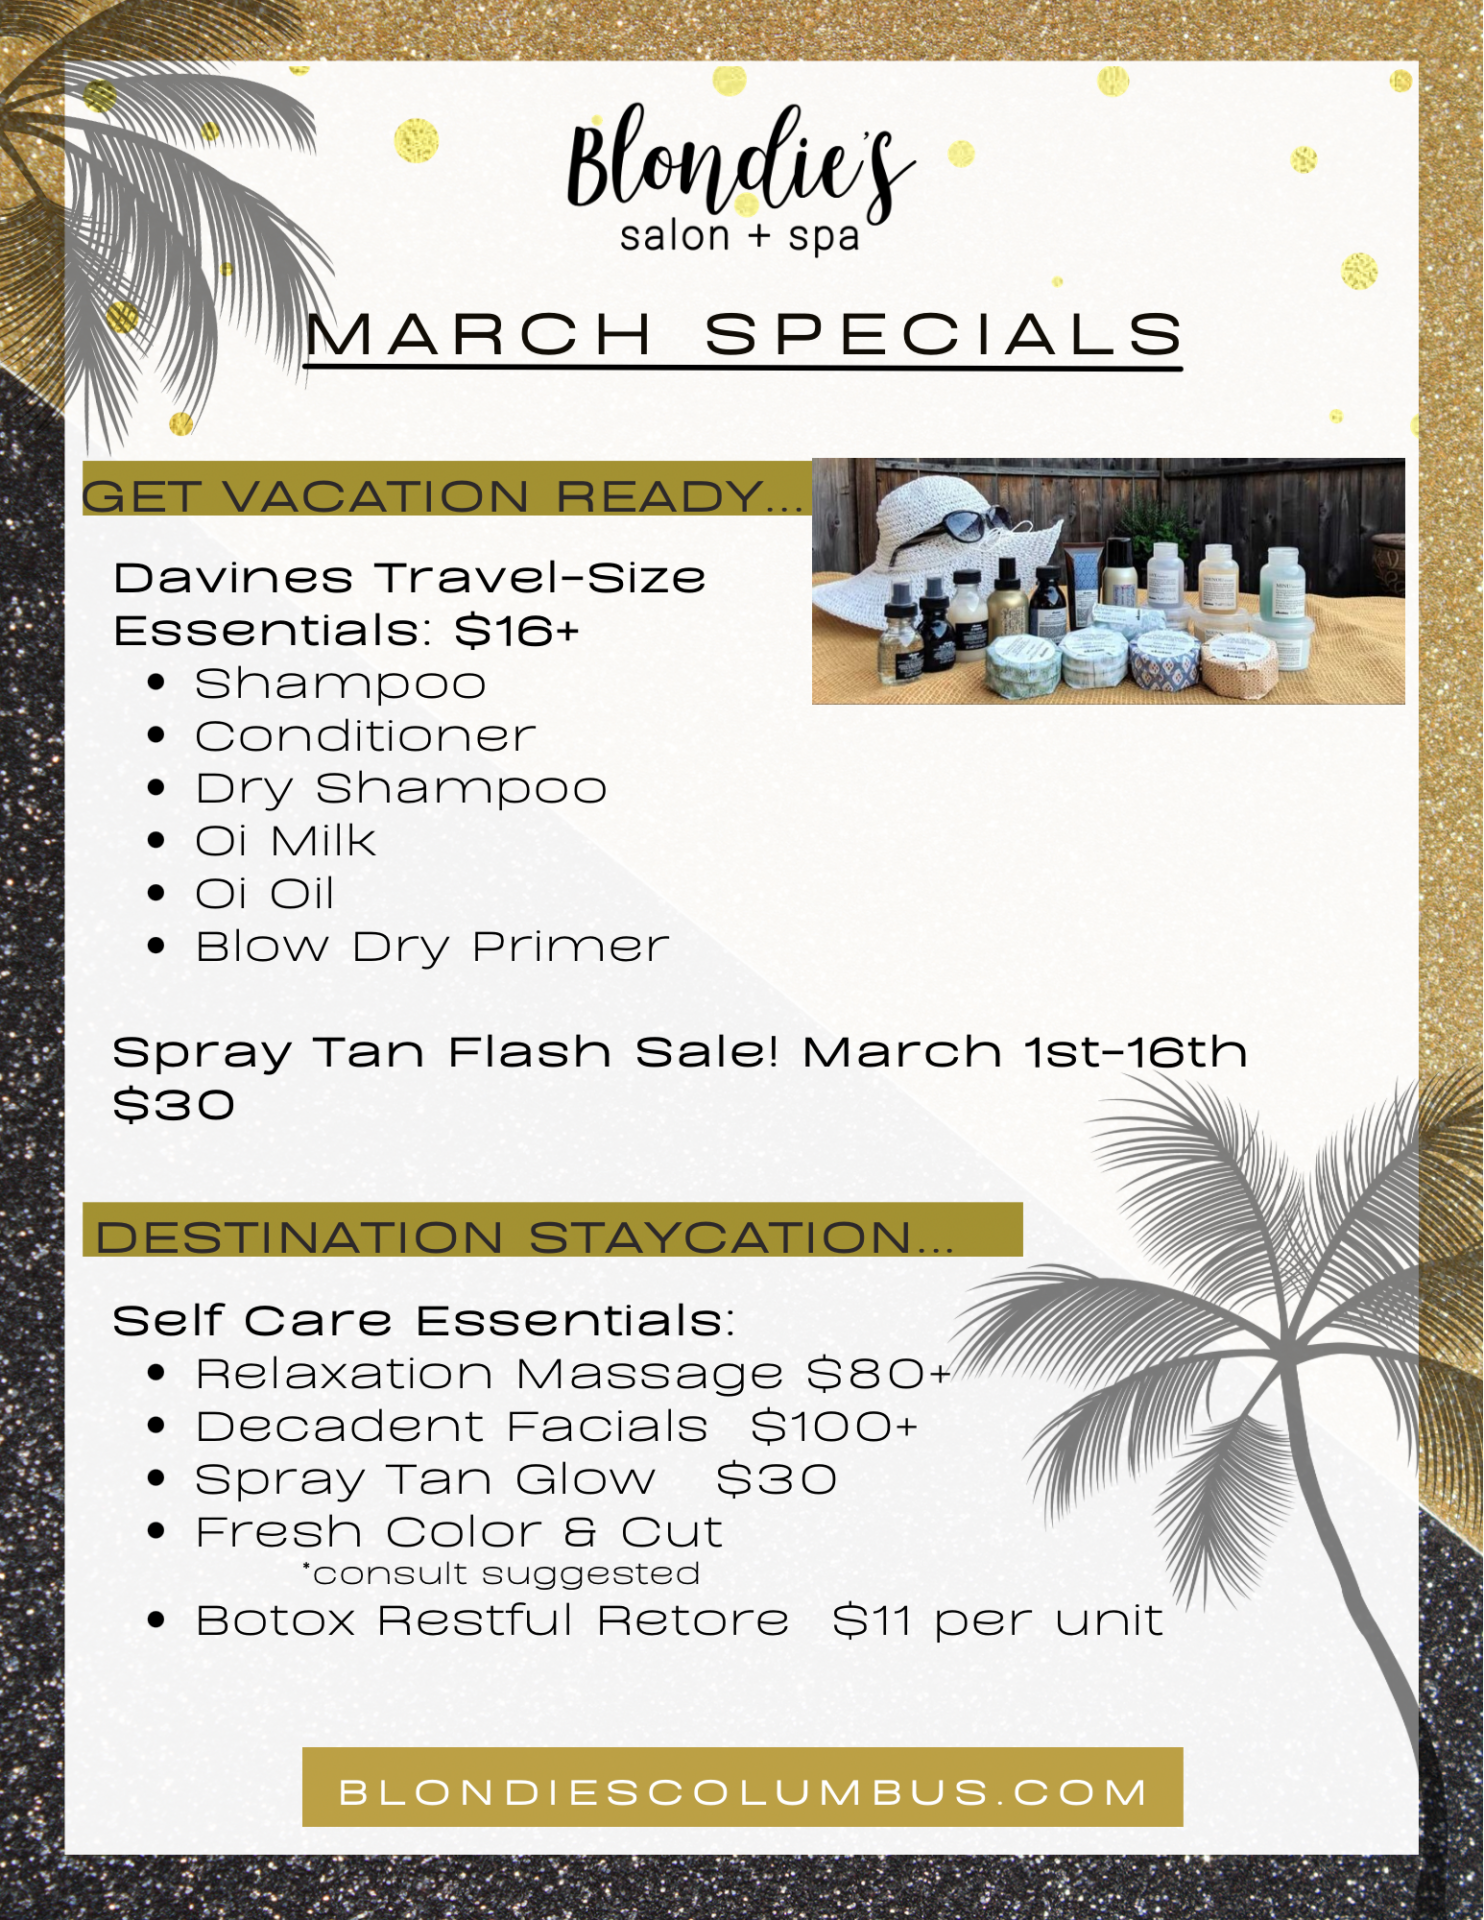 March special offers Blondies